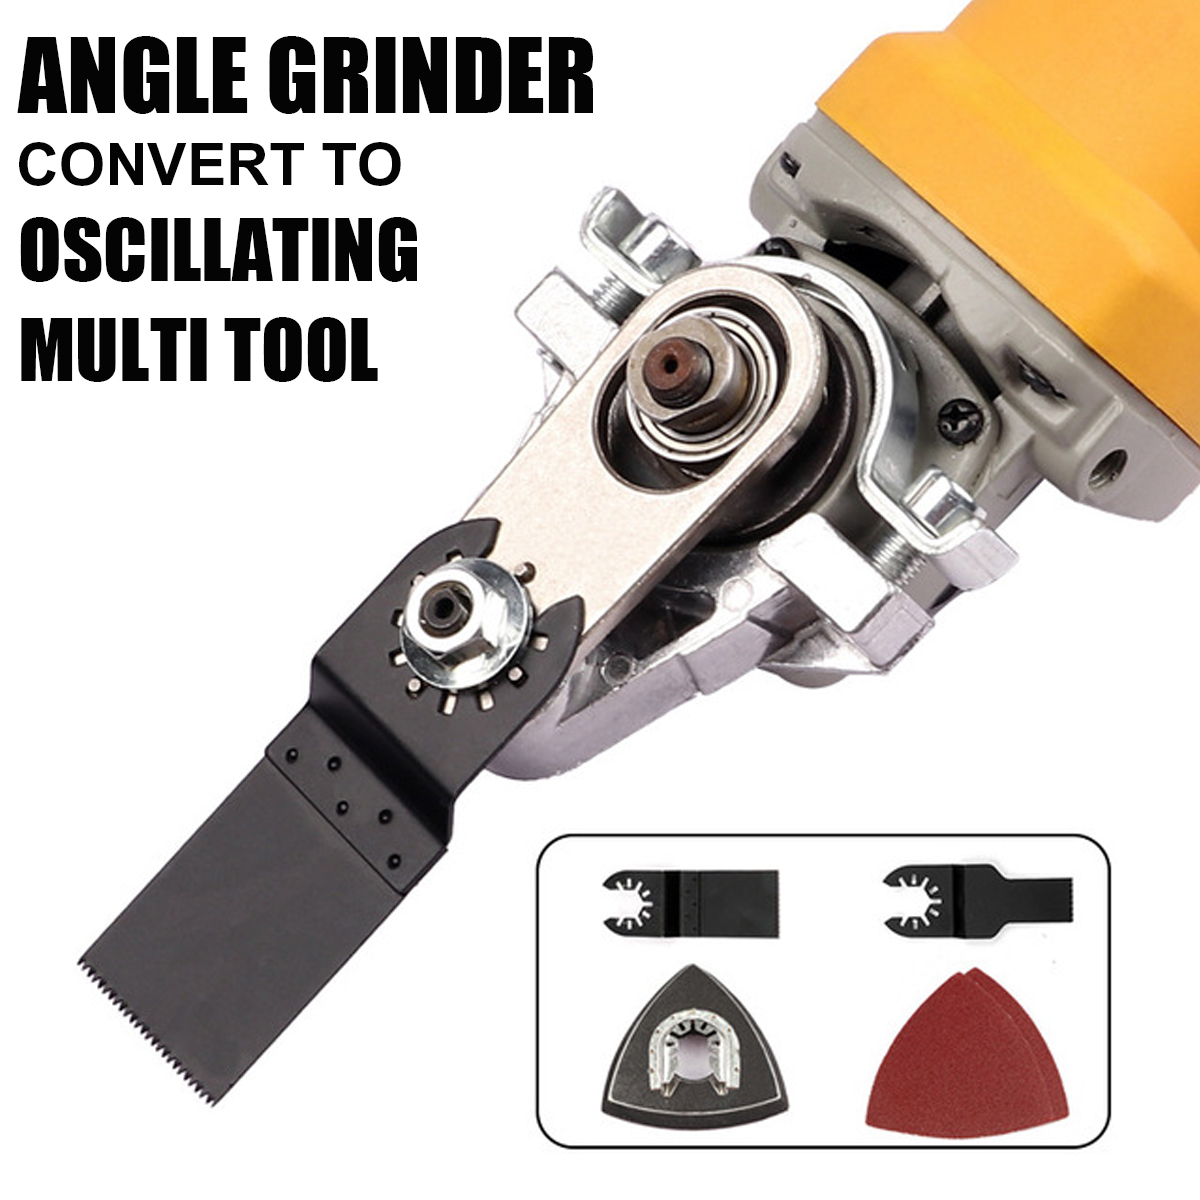 Cordless-Oscillating-Multi-Tool-Angle-Grinder-Conversion-Tool-Head-For-100mm-Angle-Grinder-1897823-3